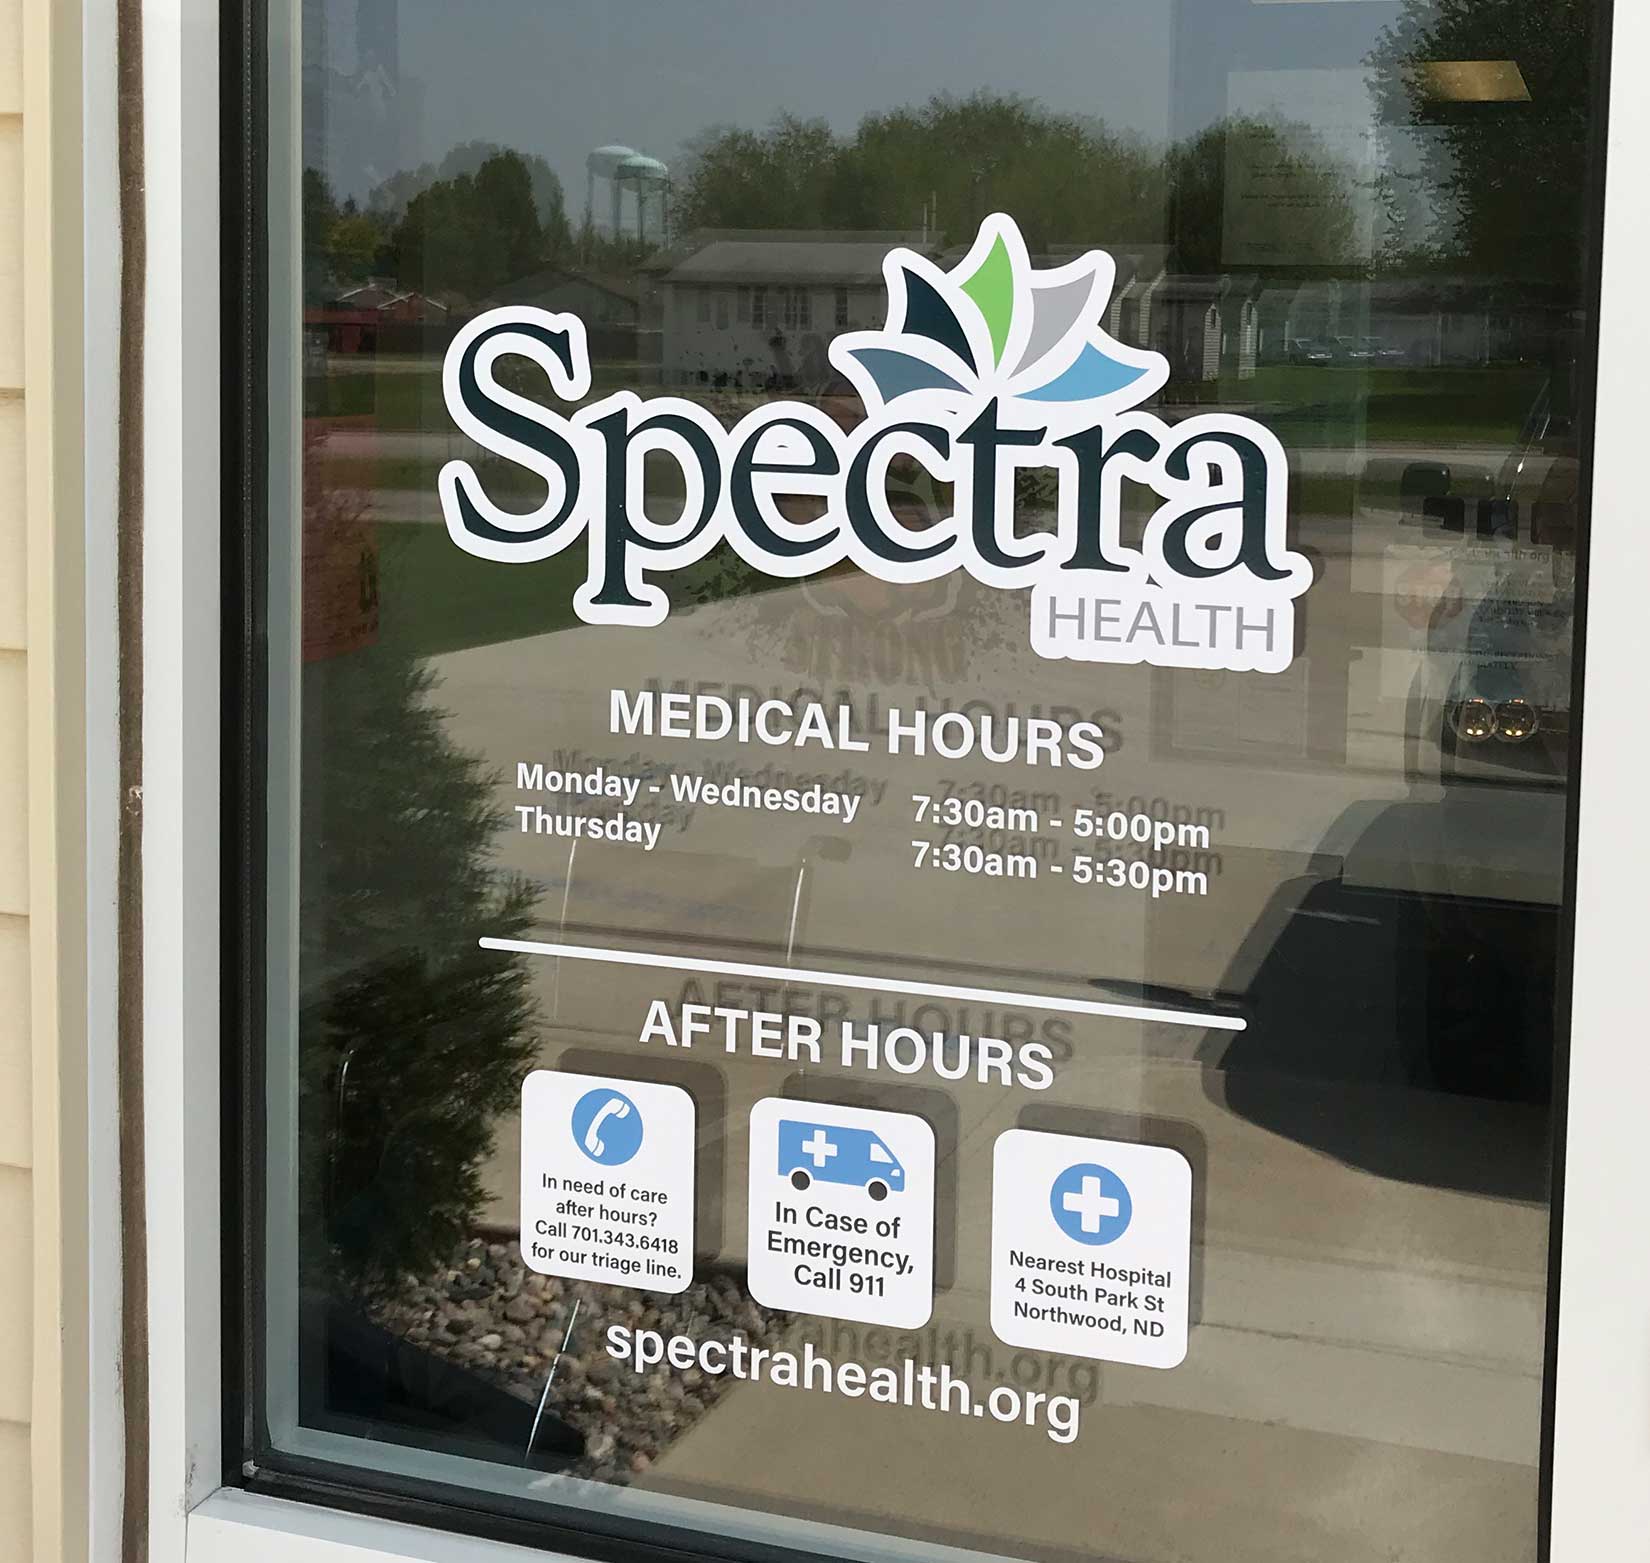 An exterior window sign for Spectra Health with its logo, hours, and website information